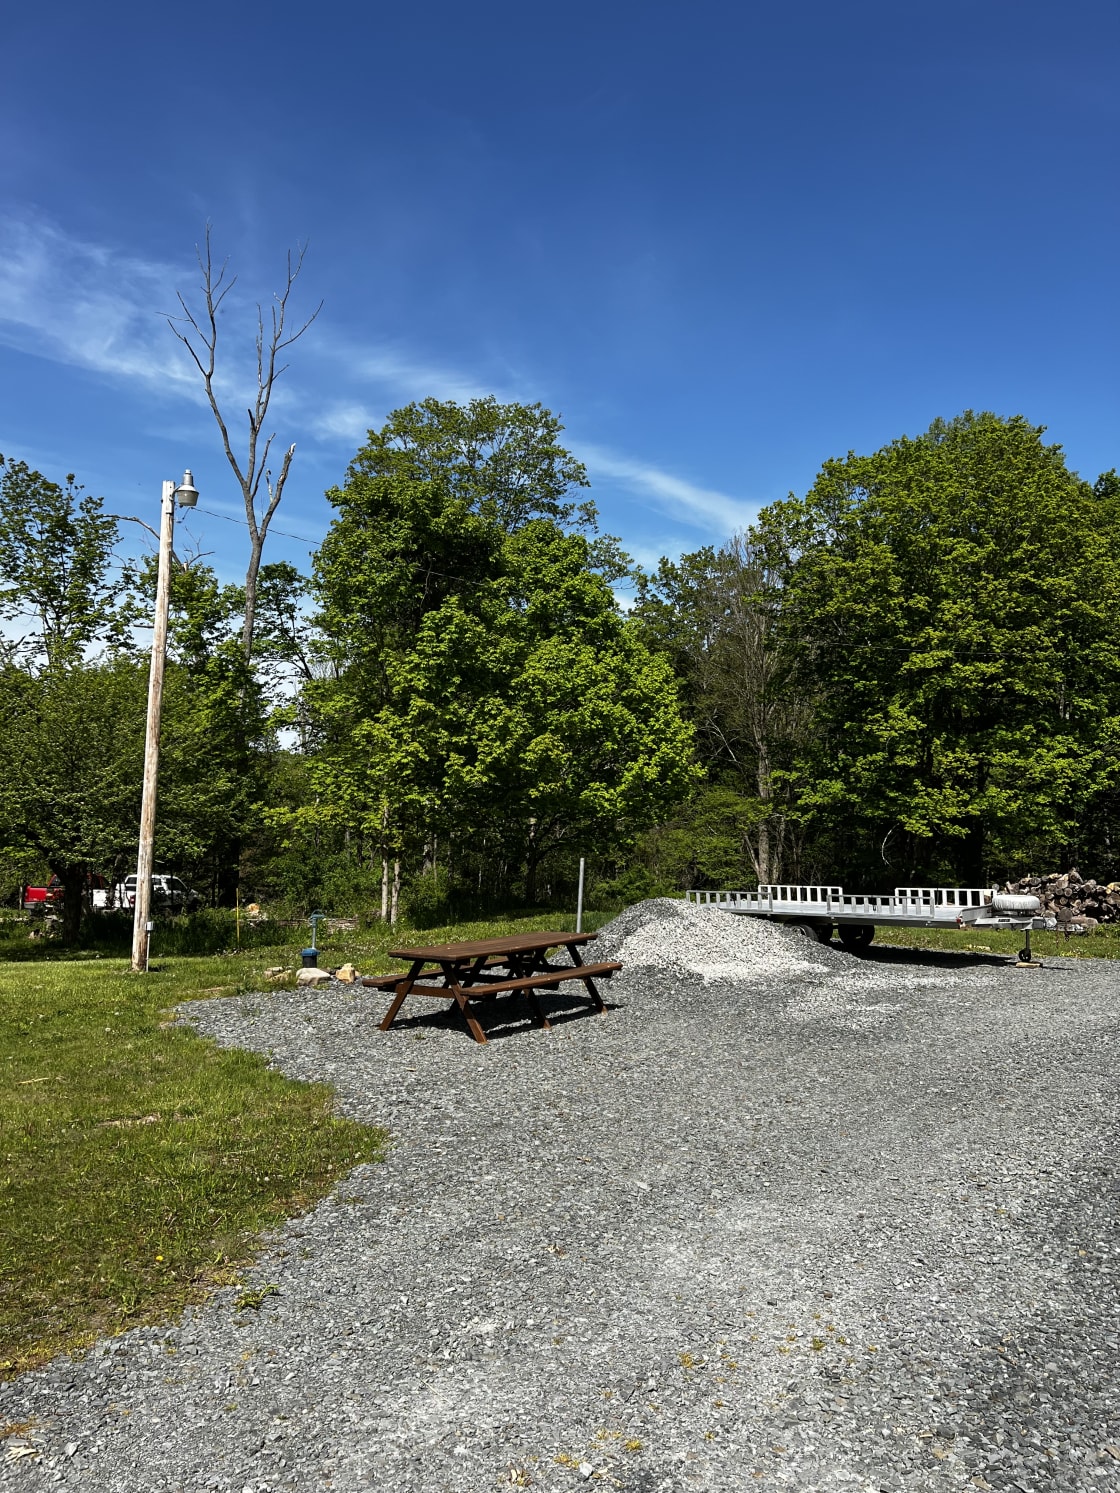 Picnic table at camp site